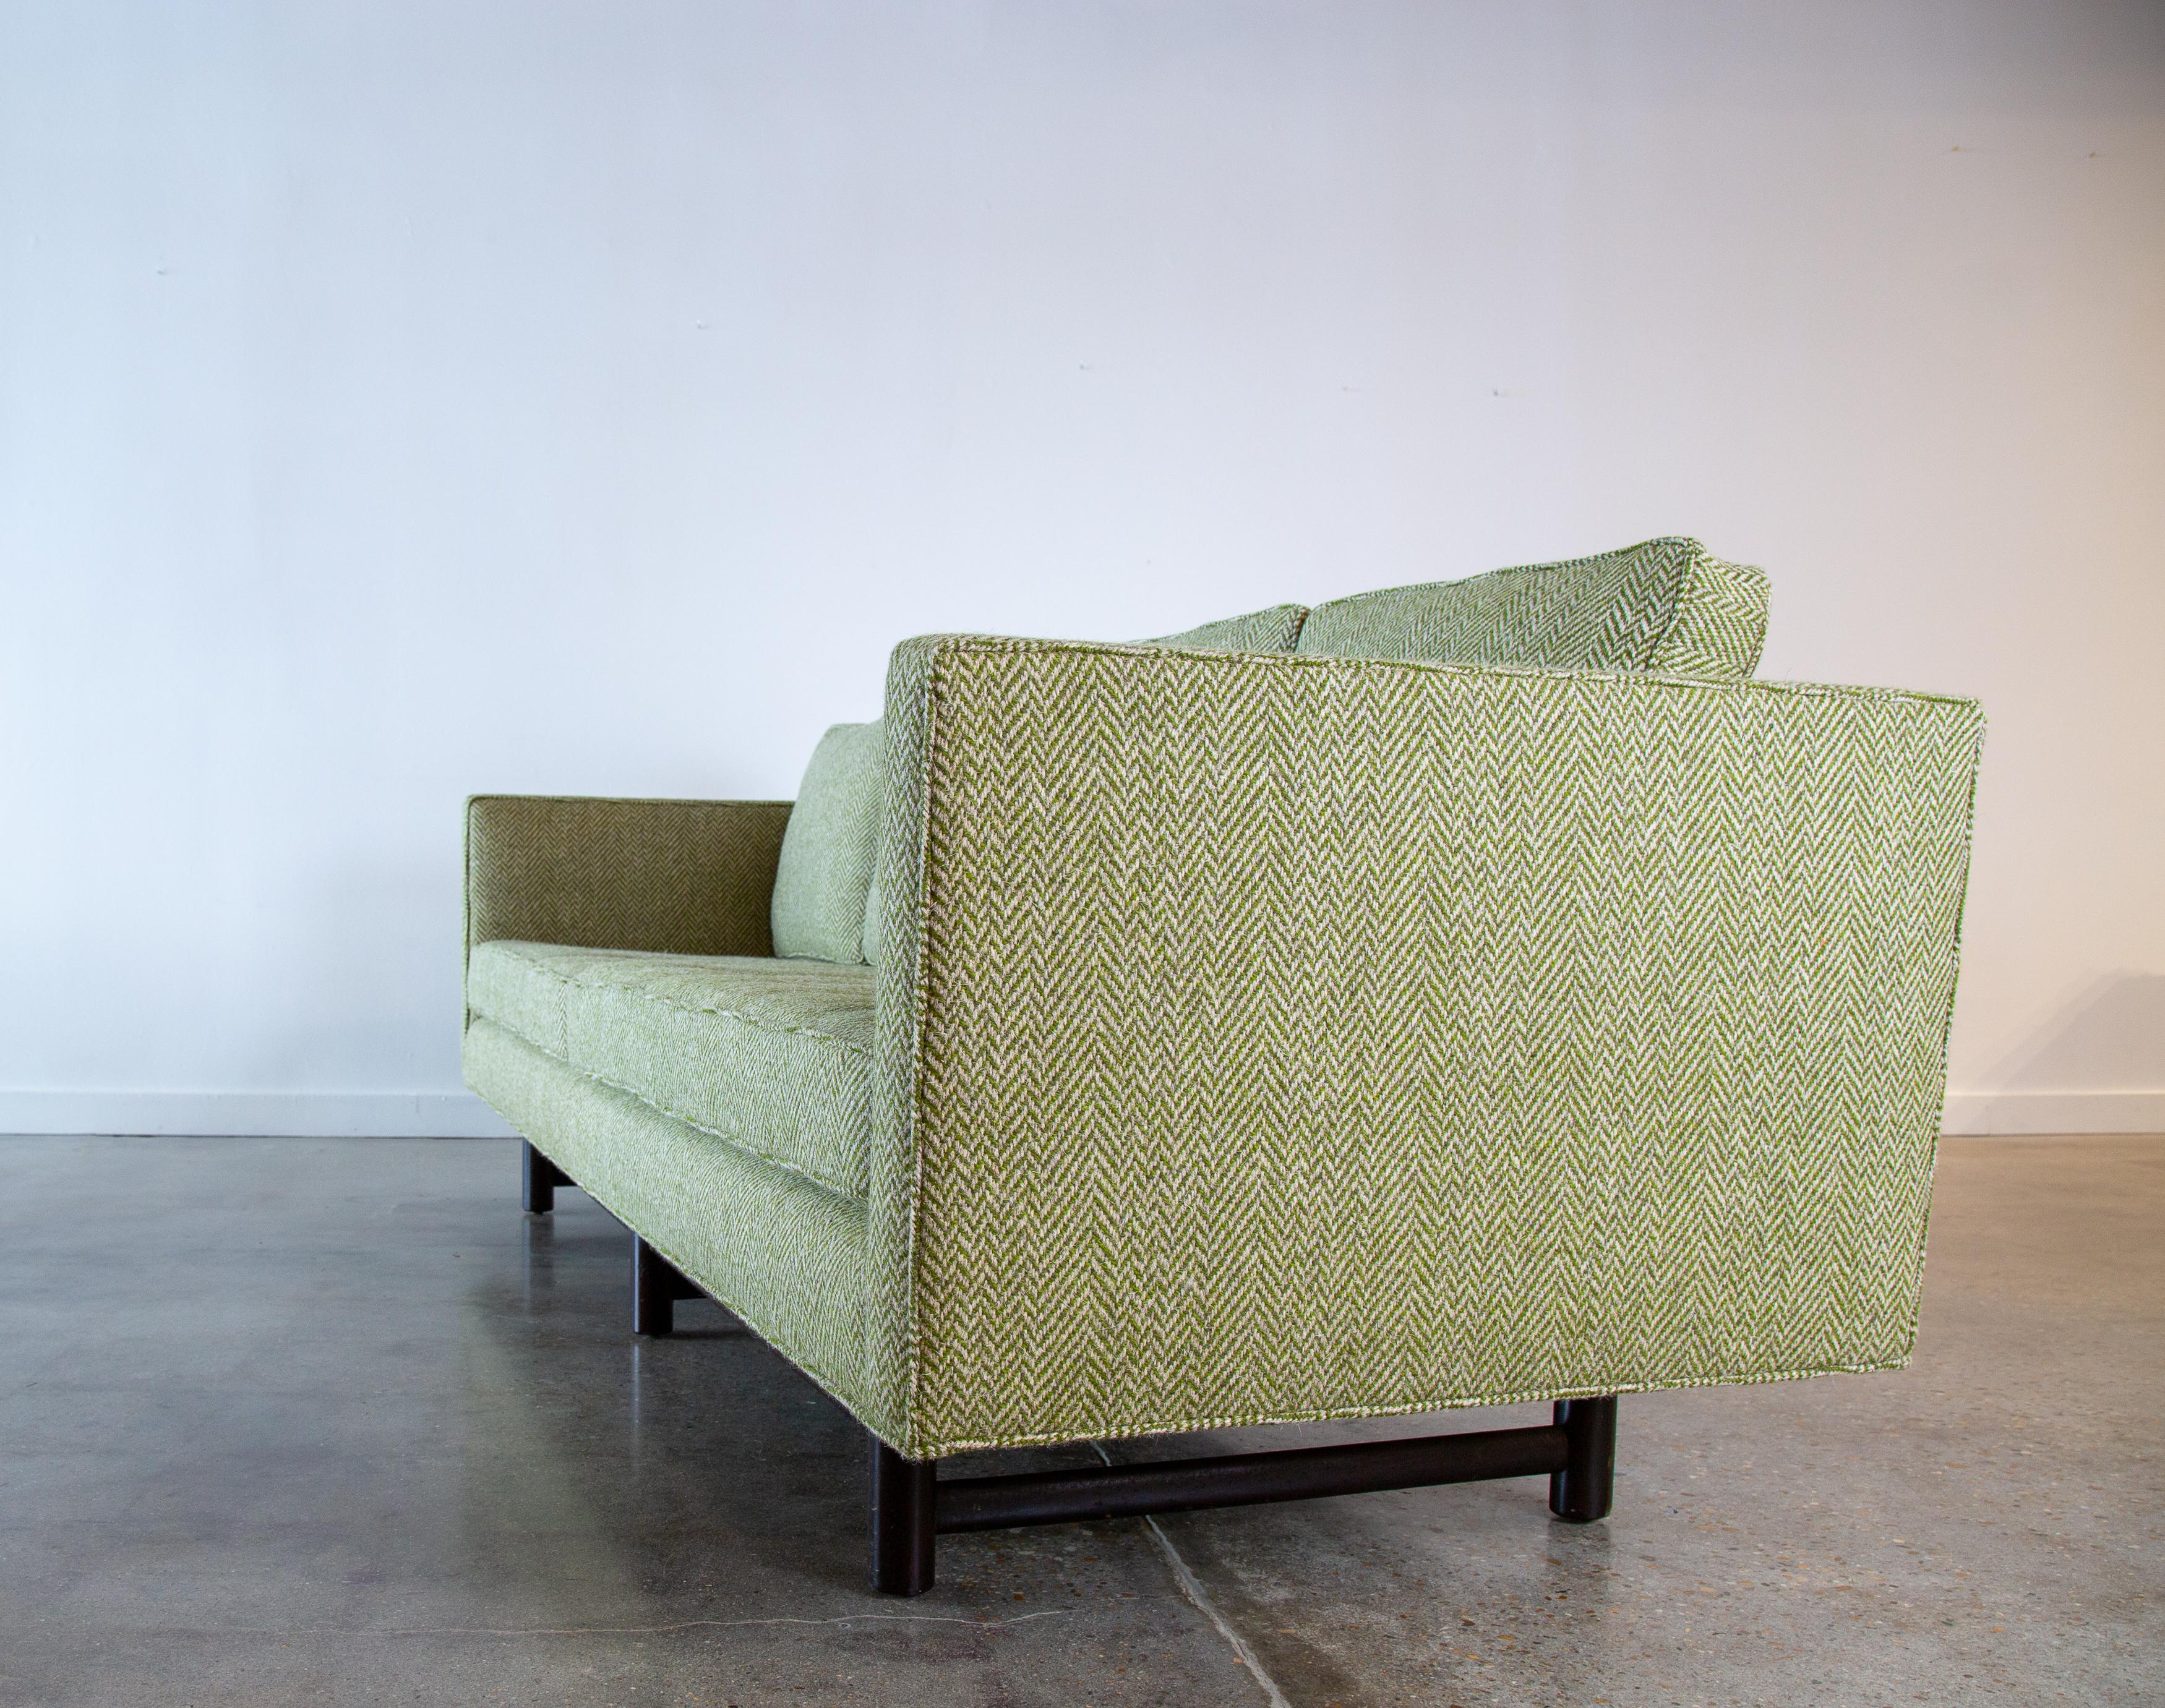 A 1950s tuxedo, even arm sofa by Edward Wormley for Dunbar, model 5138. The sofa floats on a solid mahogany base and is upholstered with new foam and a high end green wool fabric from Vladimir Kagan’s personal archive of fabrics.  A great green and